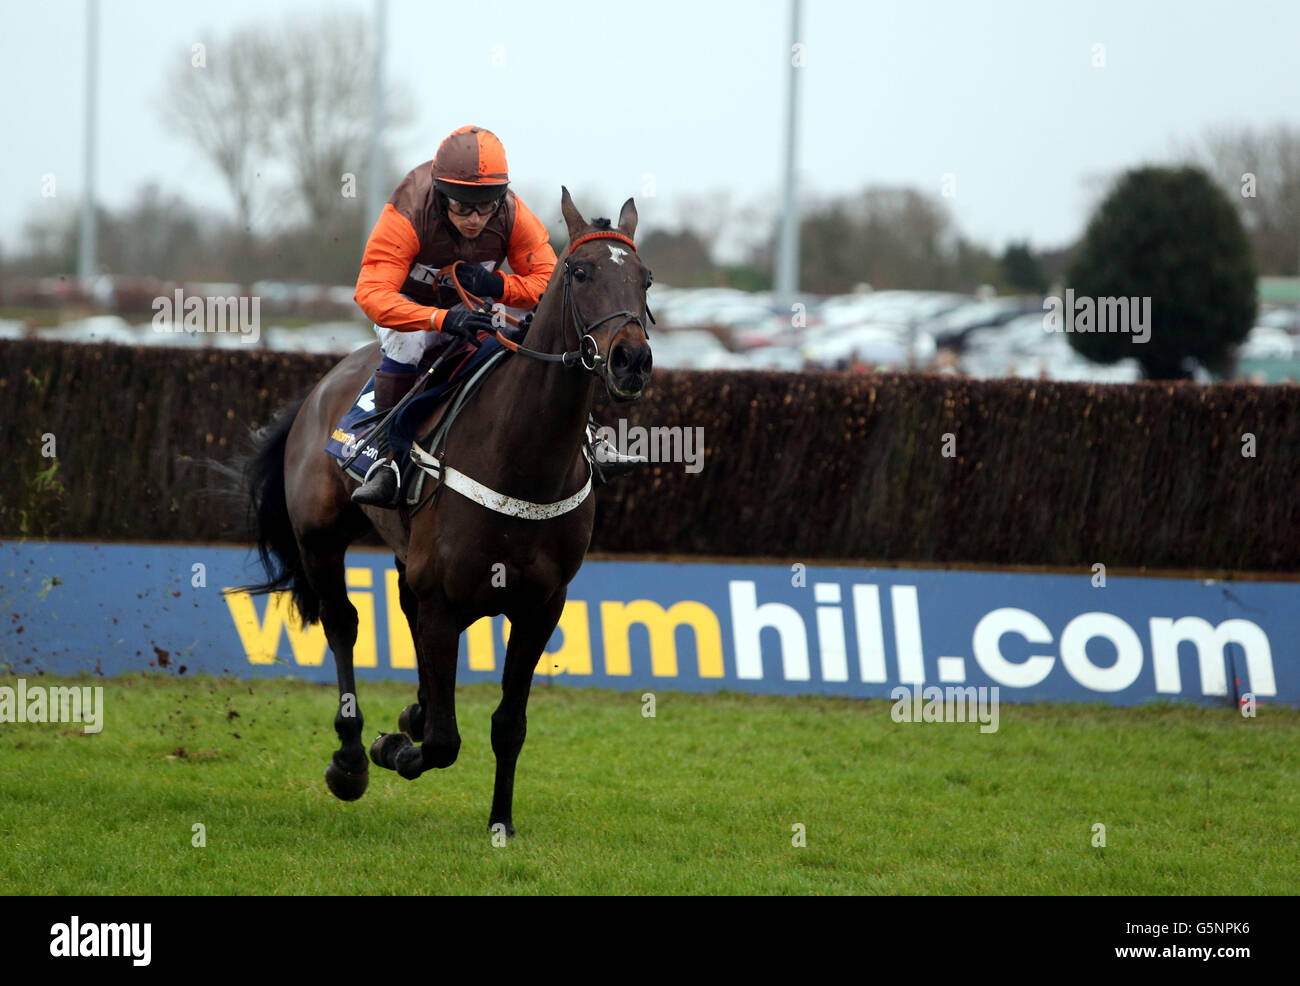 Rajdhani Express ridden by Sam Waley-Cohen wins the William Hill - Download The App Novices Handicap Steeple Chase during the William Hill Winter Festival at Kempton Park Racecourse, Middlesex. Stock Photo